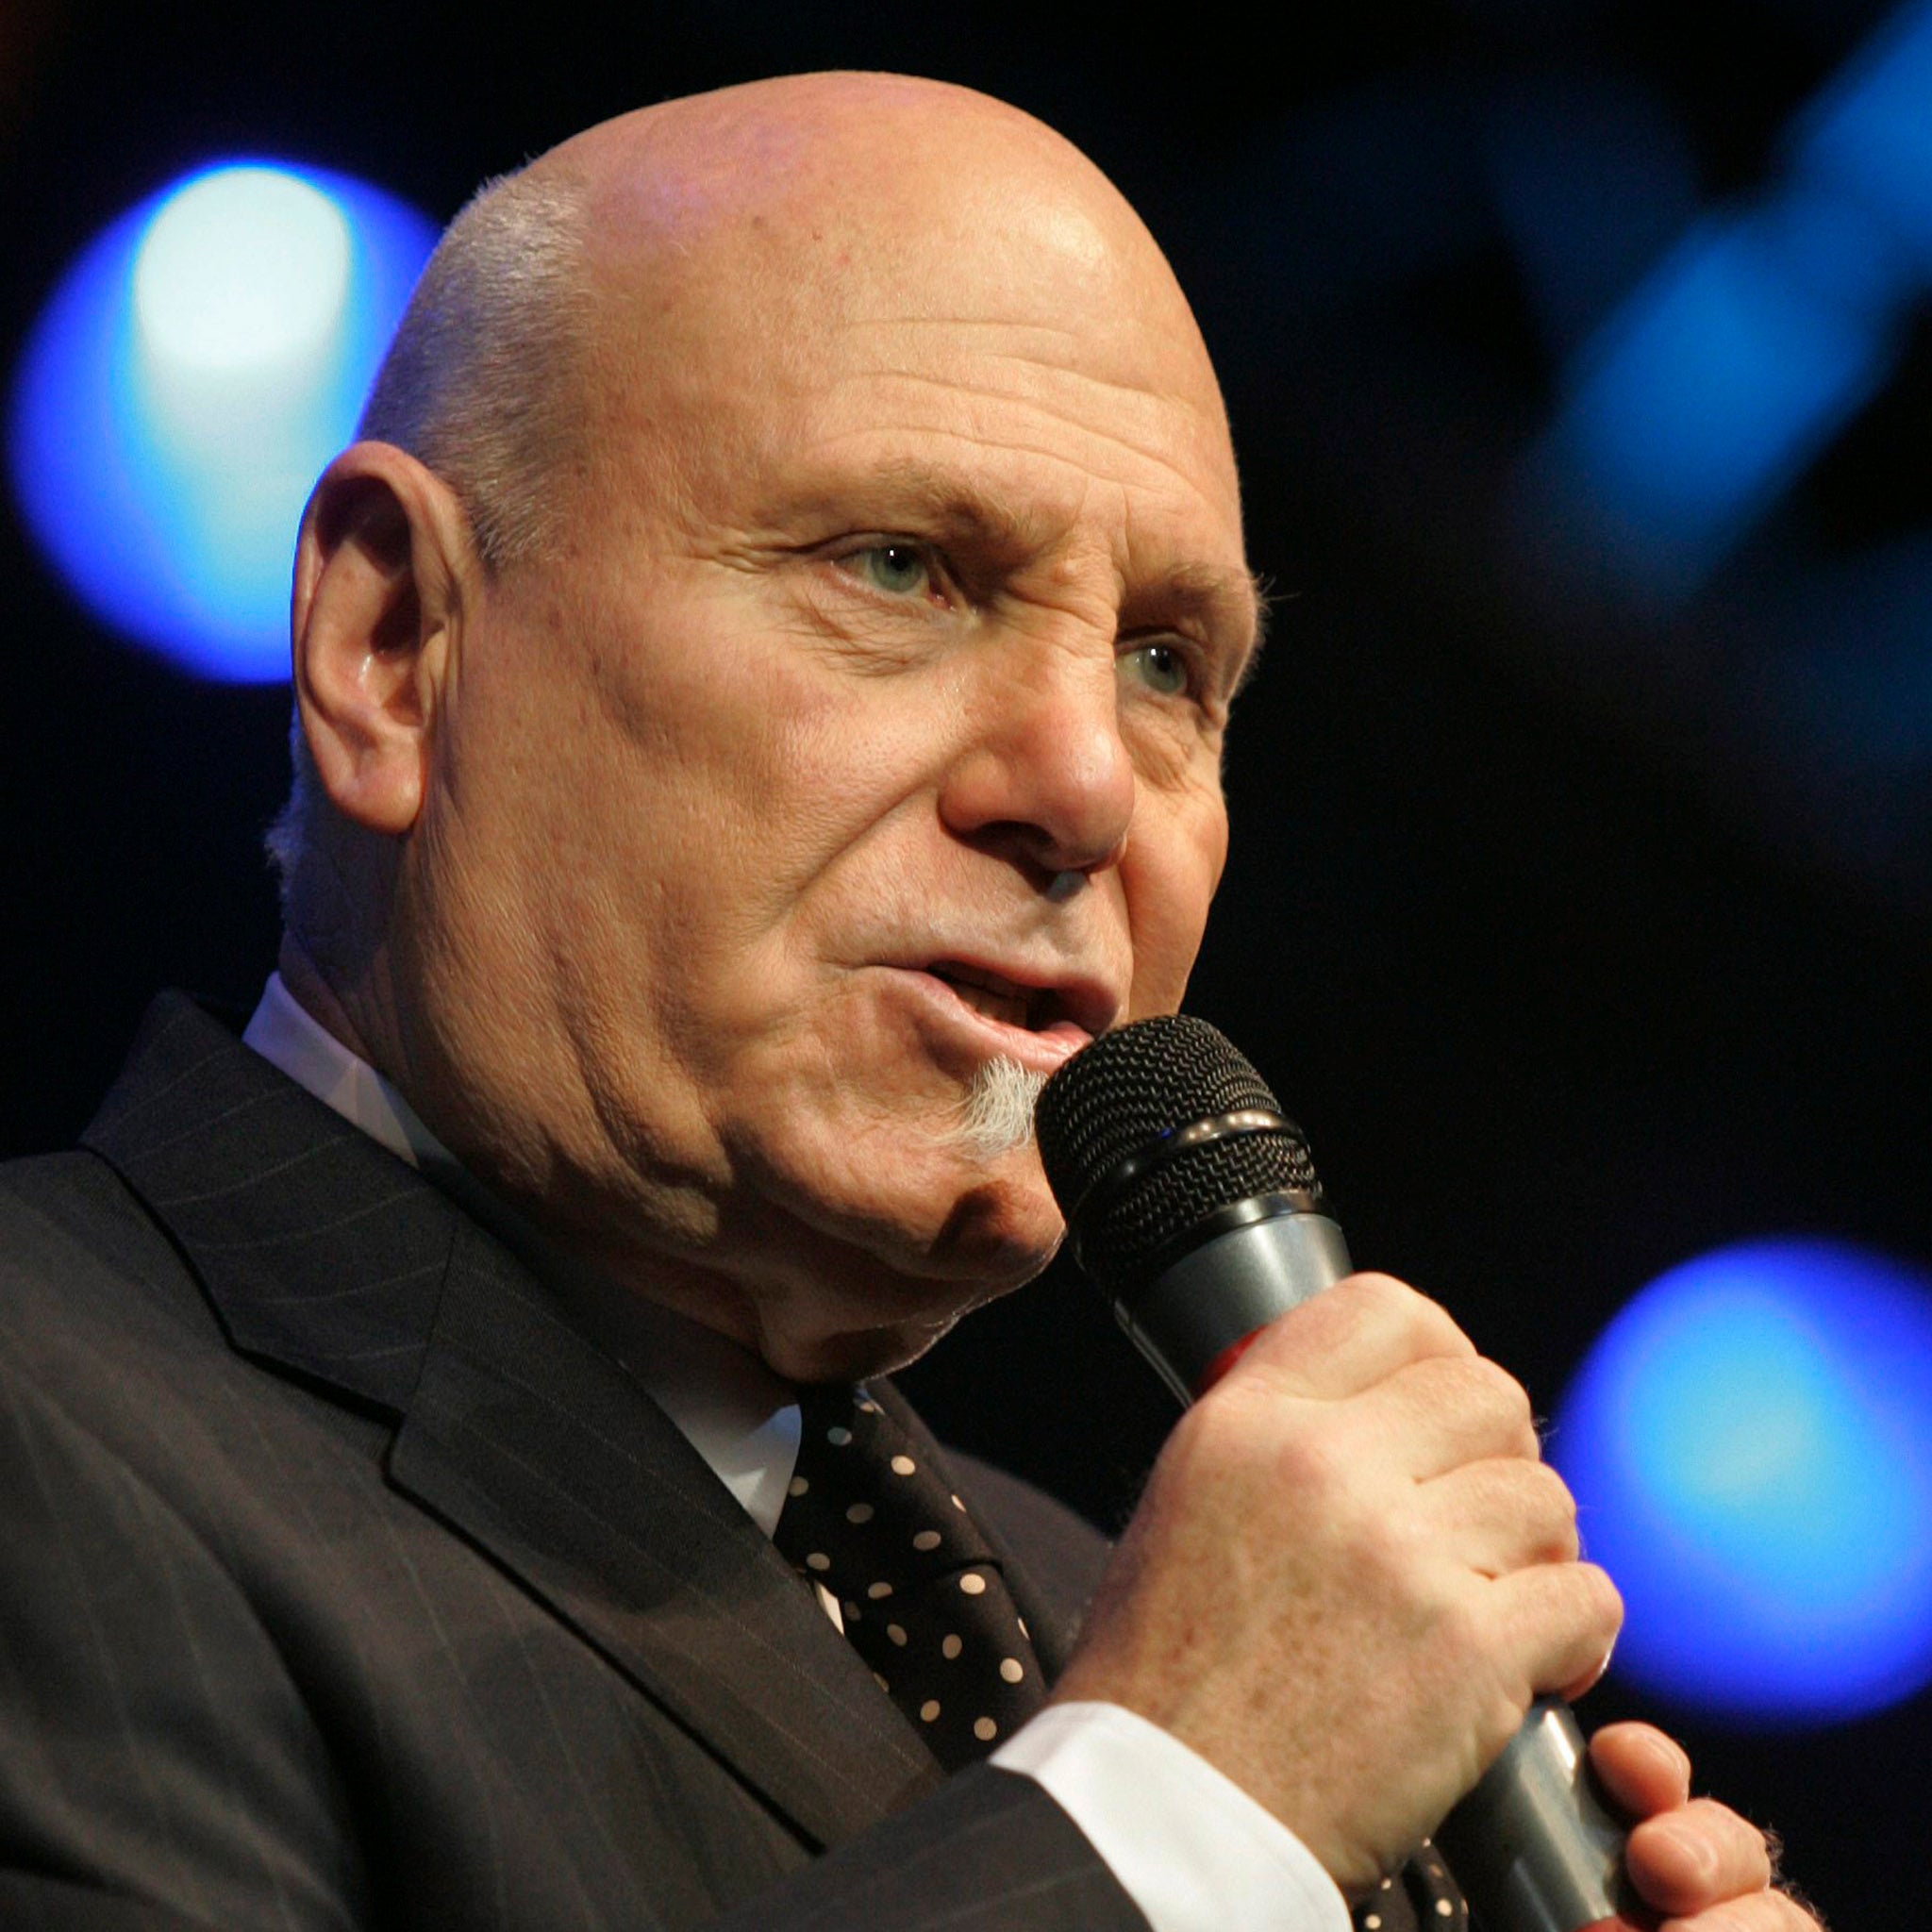 Tim Hauser of the US vocal group 'The Manhattan Transfer' performs on stage at the Avo Session in Basel, Switzerland, Wednesday 08 November 2006.